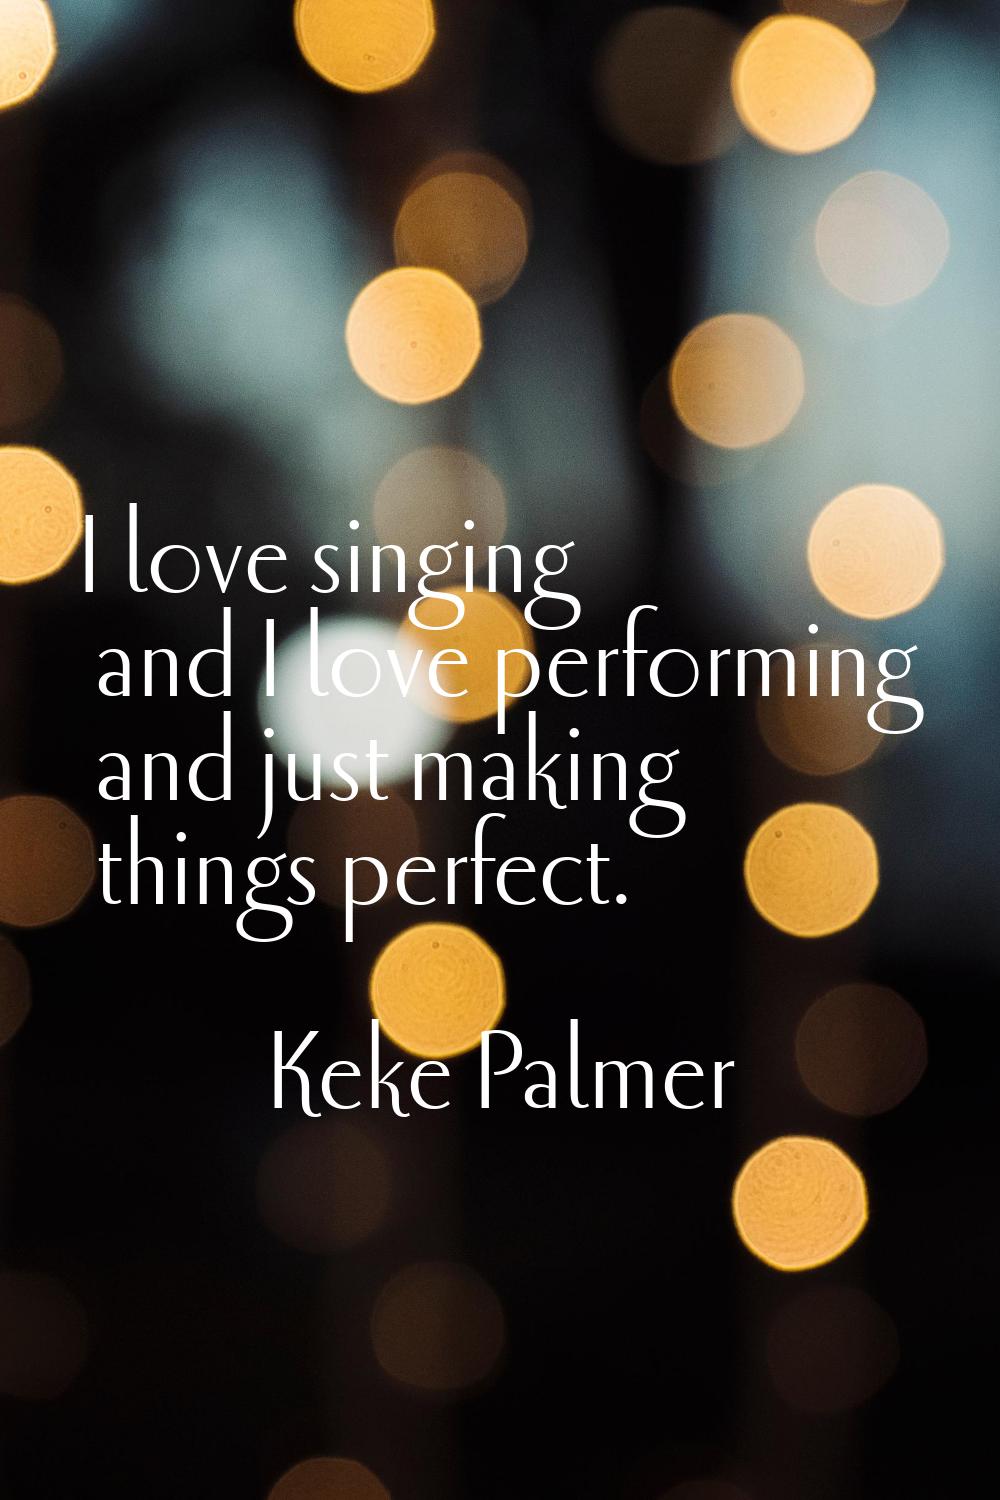 I love singing and I love performing and just making things perfect.